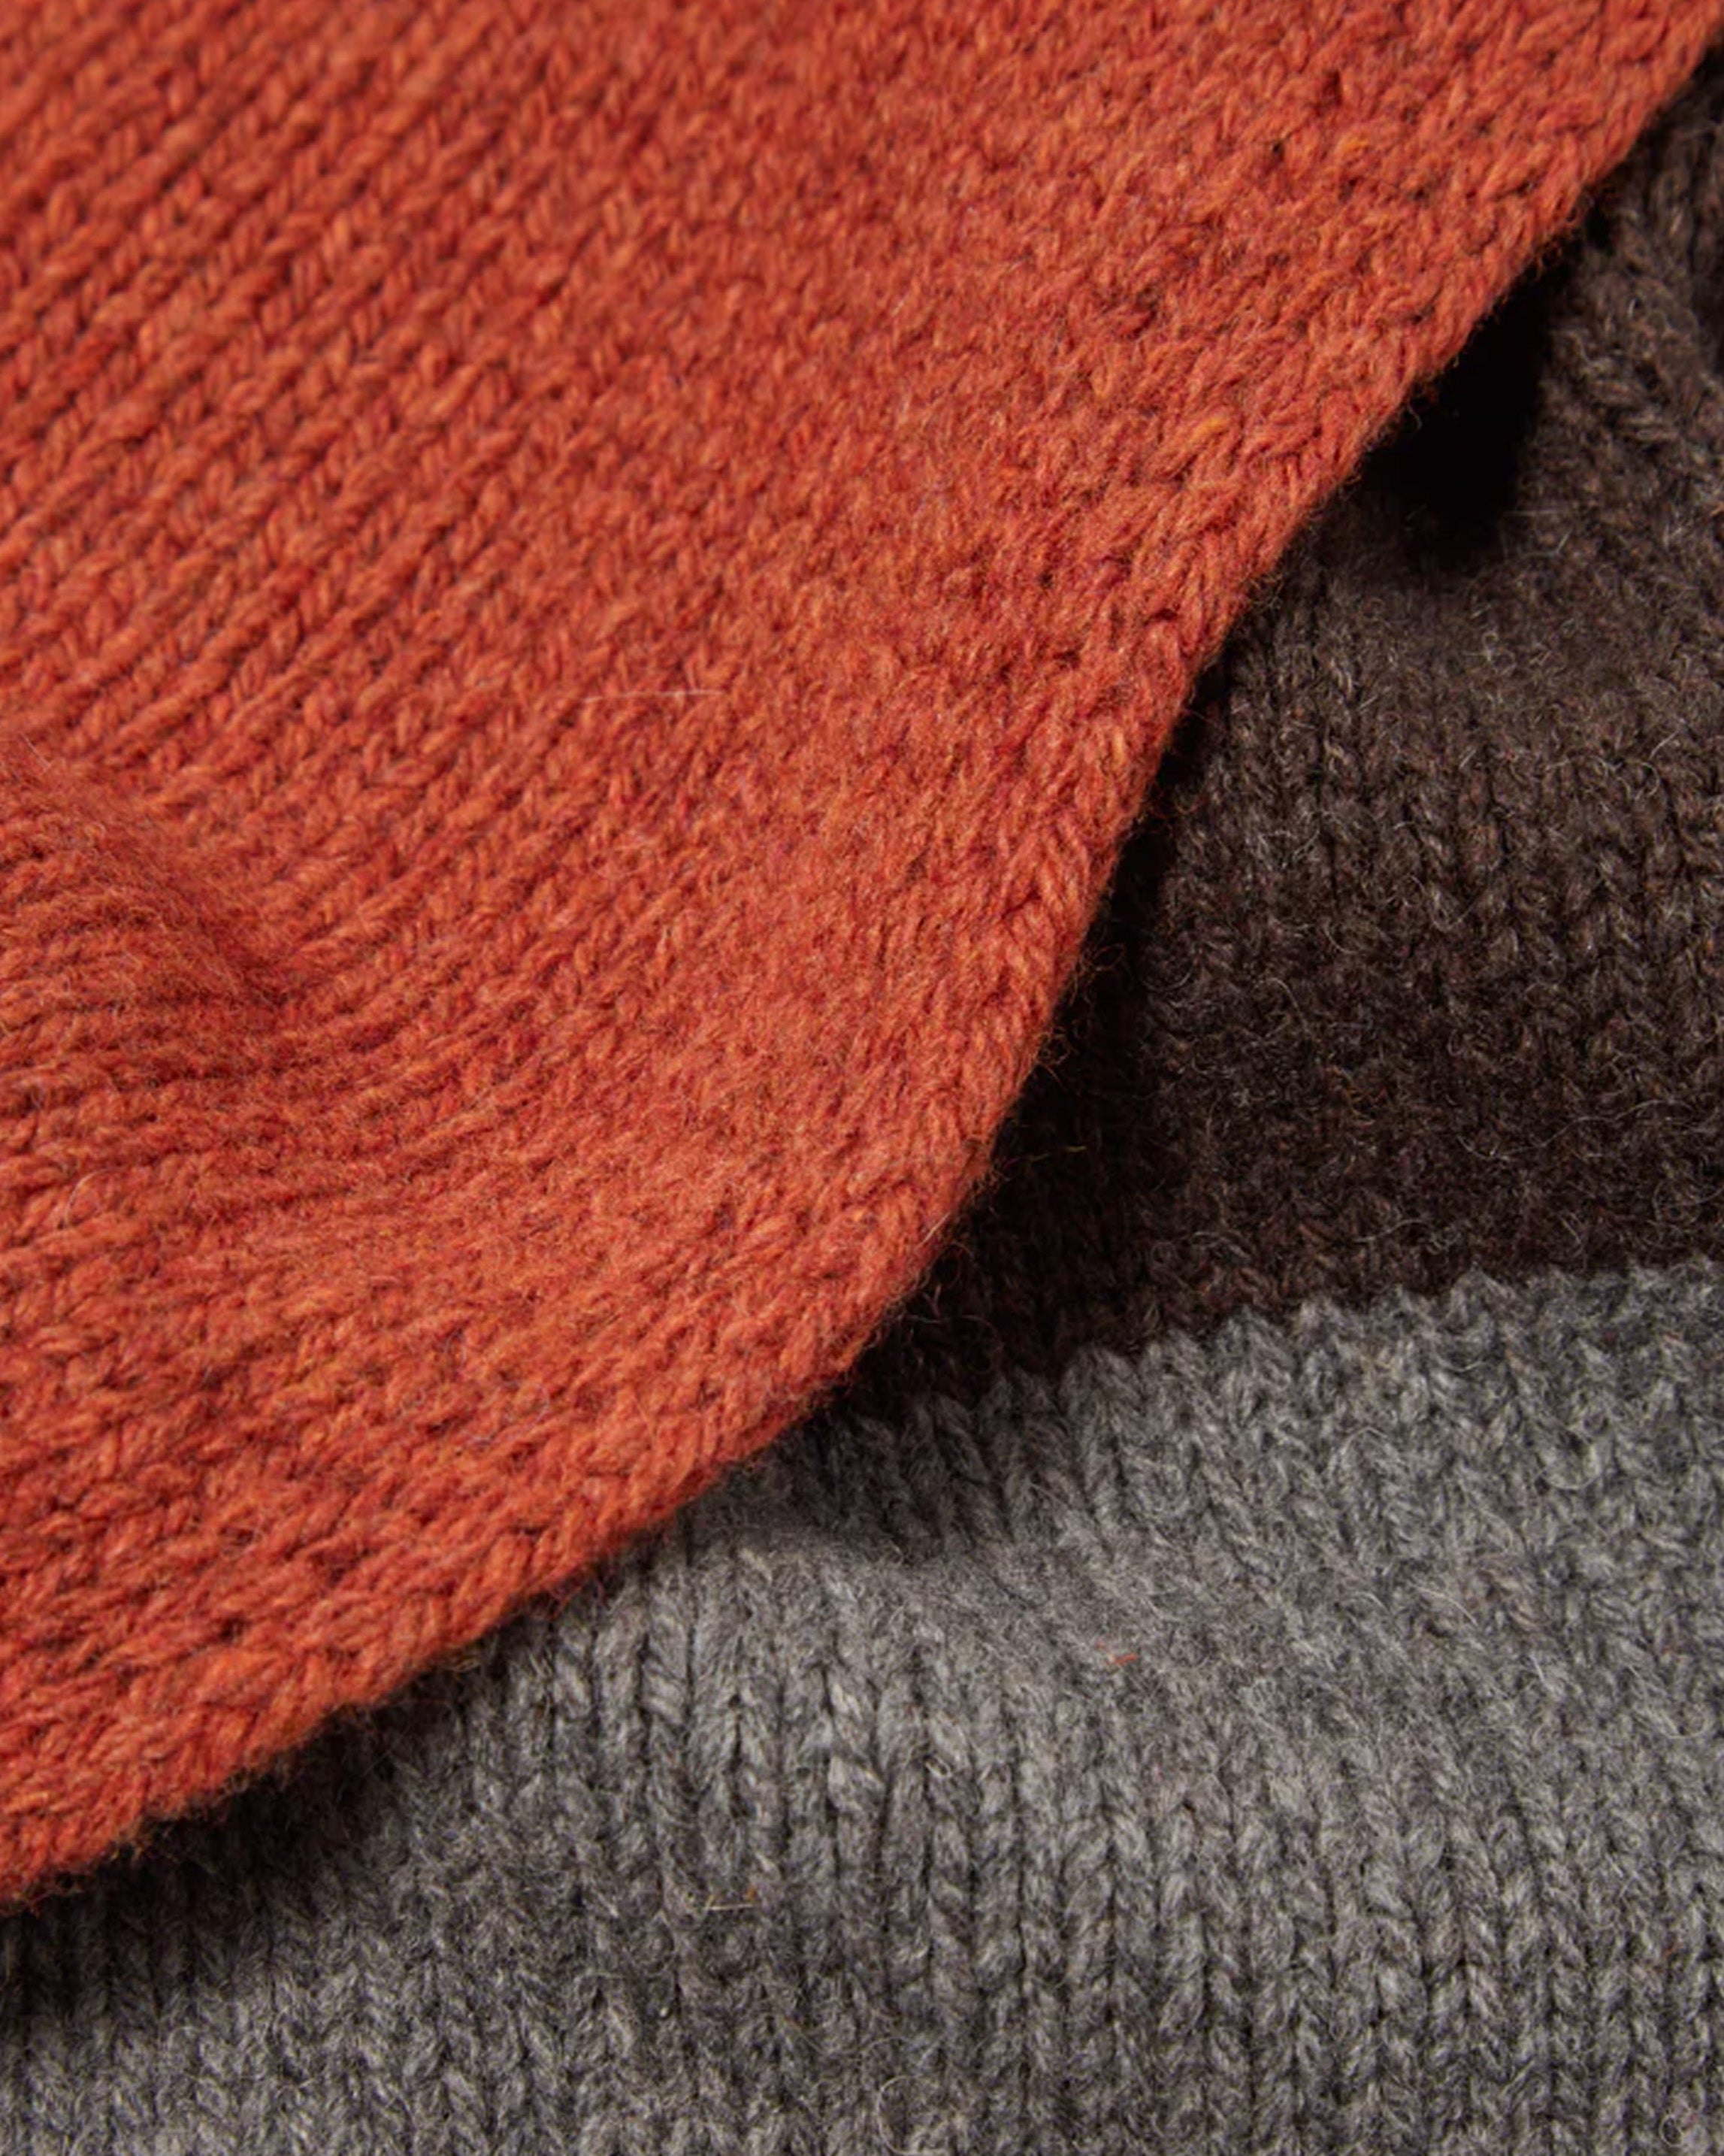 Eco Wool comes from one of our favourite Italian suppliers of ethically sourced, mostly up-cycled and recycled fibres. It makes a soft and durable wool yarn that we use to produce many of our best-knit pieces. A must-have every winter. • Three-tone seasonal knit. • Fabric Content: 81% Wool, 15% Polyamide, 4% Other Fibres. • Washcare: Cool hand wash. Do not bleach. Do not tumble dry. Dry Flat. Warm iron. Dry Cleanable. Wash like colours together.